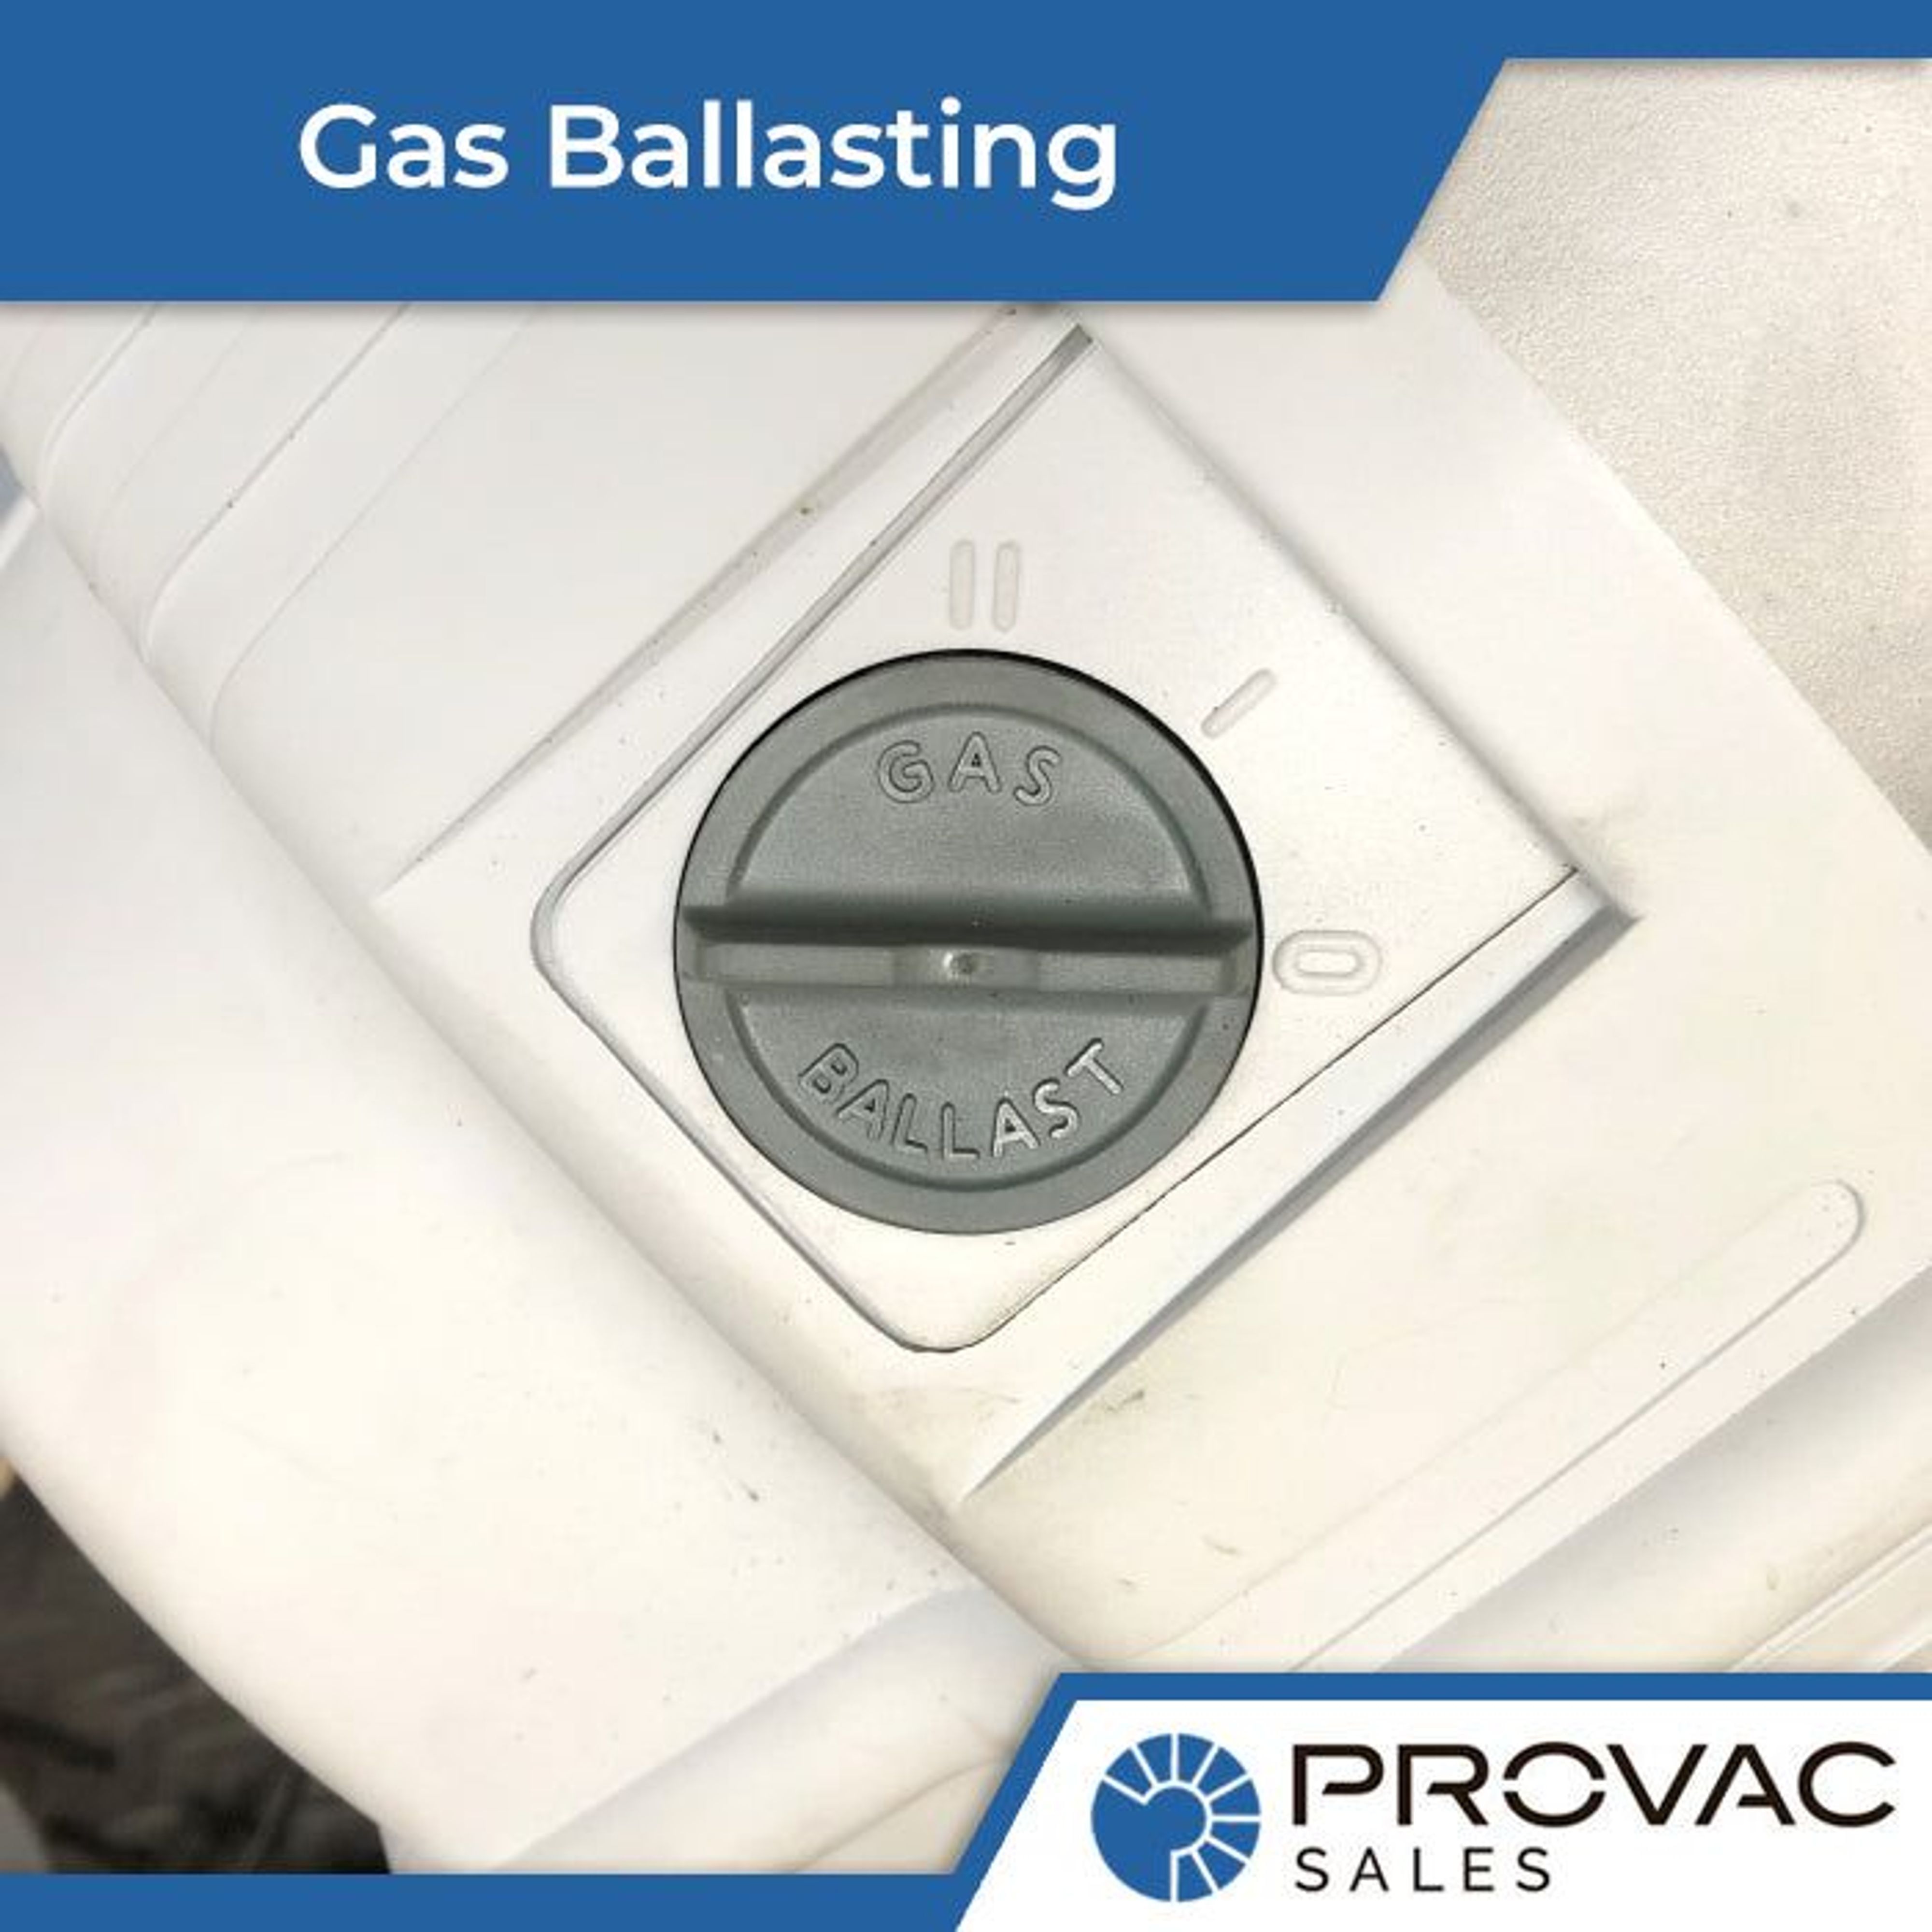 Gas Ballasting - What Is It & Why Is It Important? Background